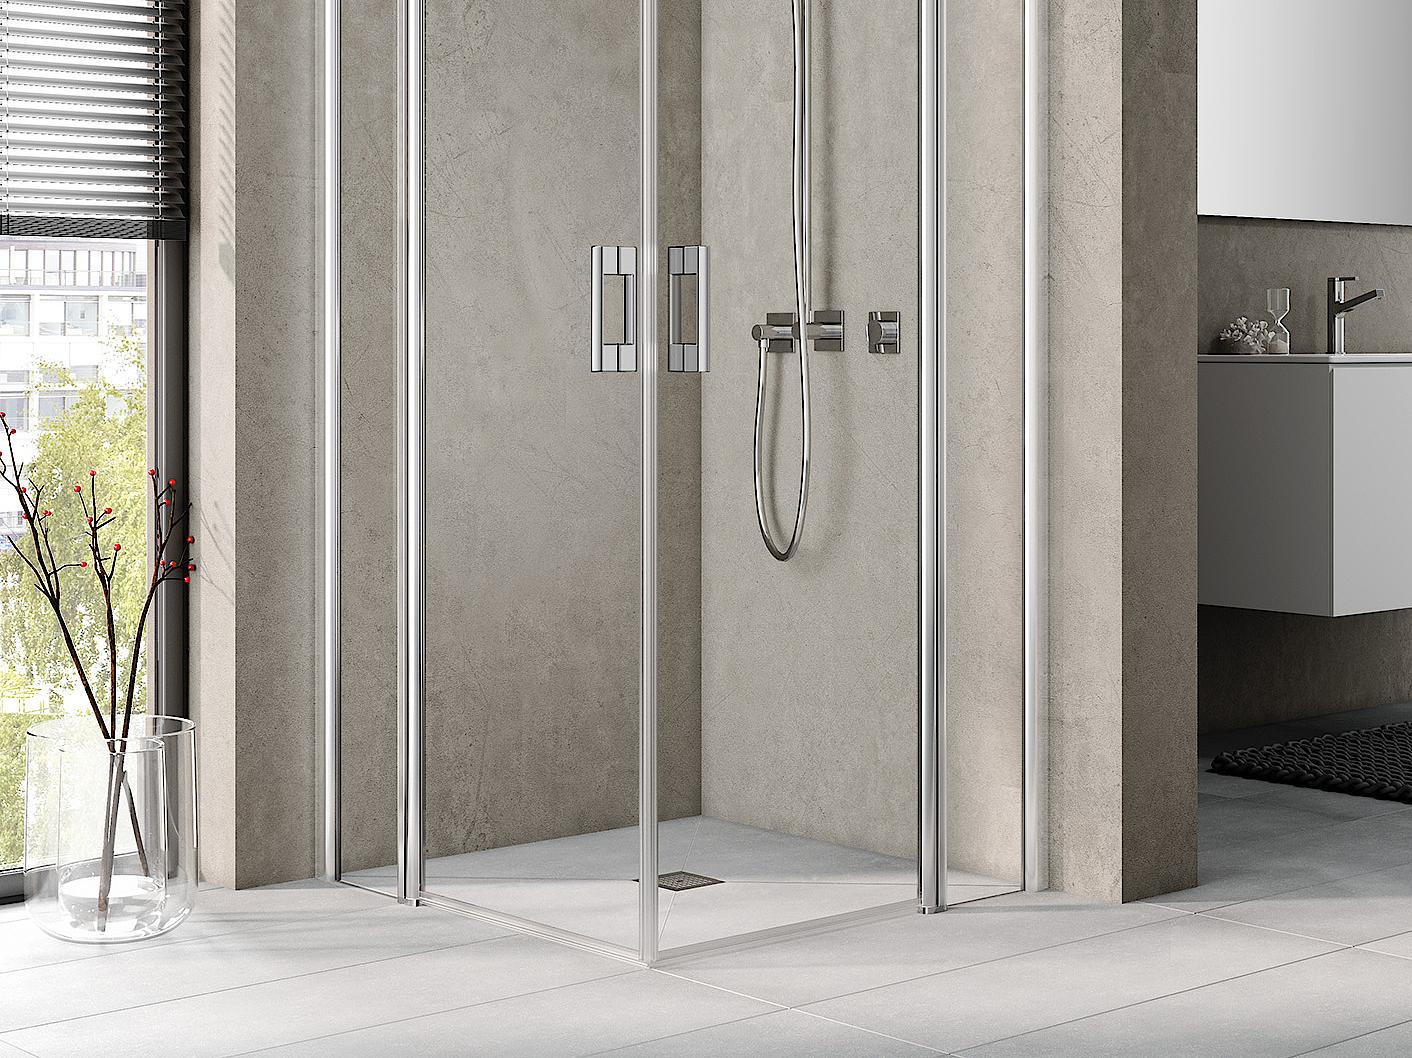 Kermi profile shower enclosure, PEGA two-part corner entry (two-part hinged doors with fixed panels)